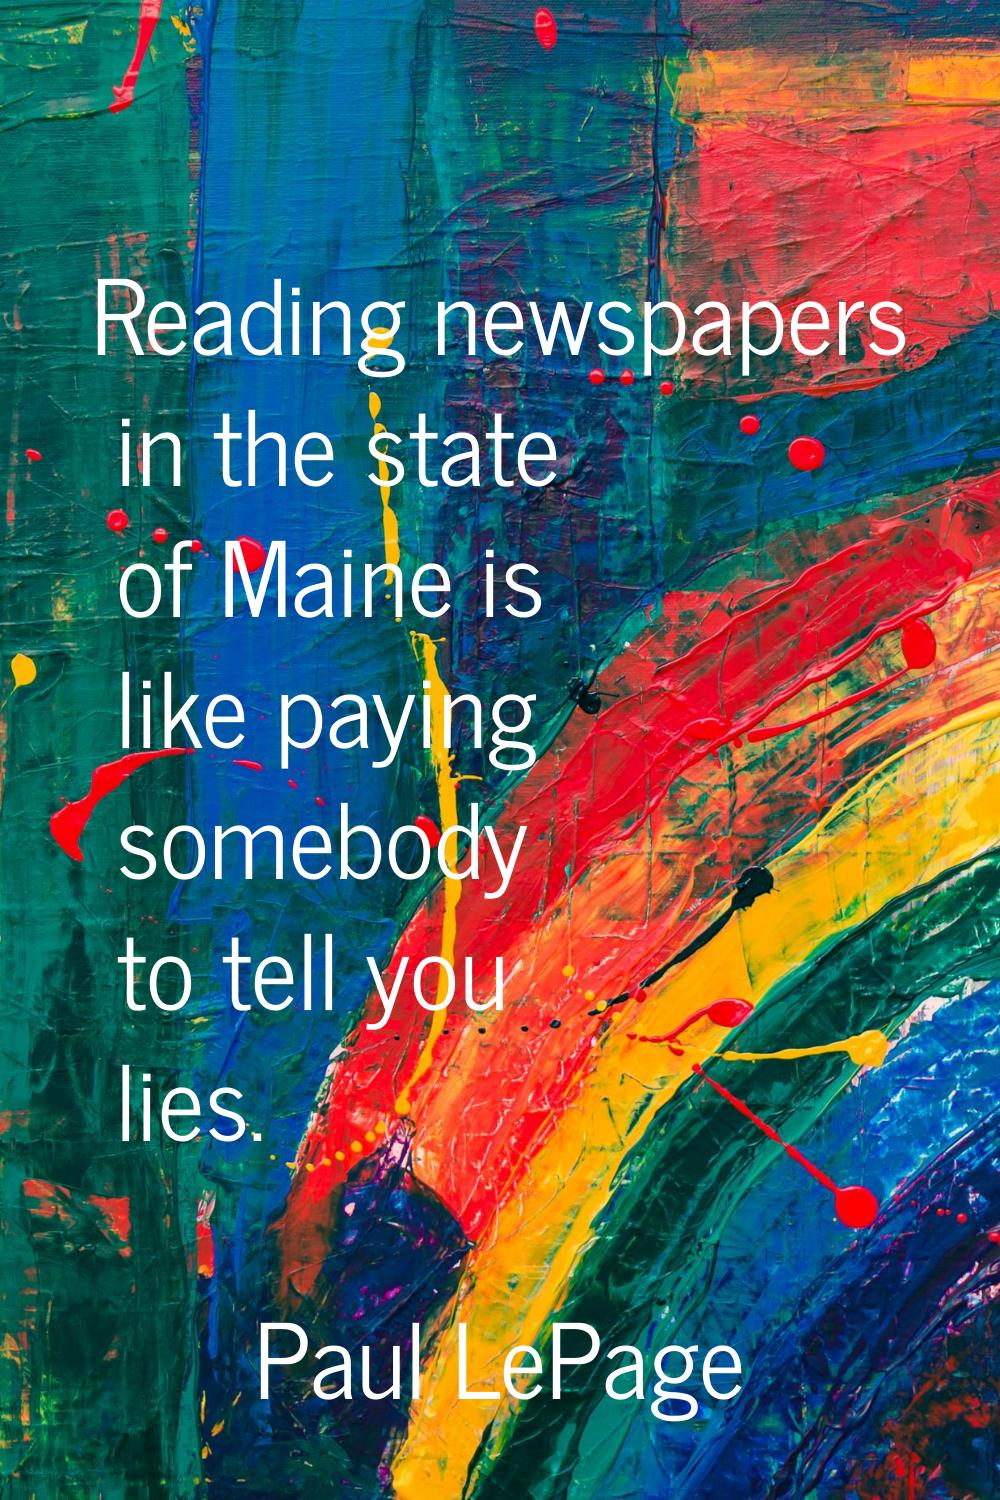 Reading newspapers in the state of Maine is like paying somebody to tell you lies.